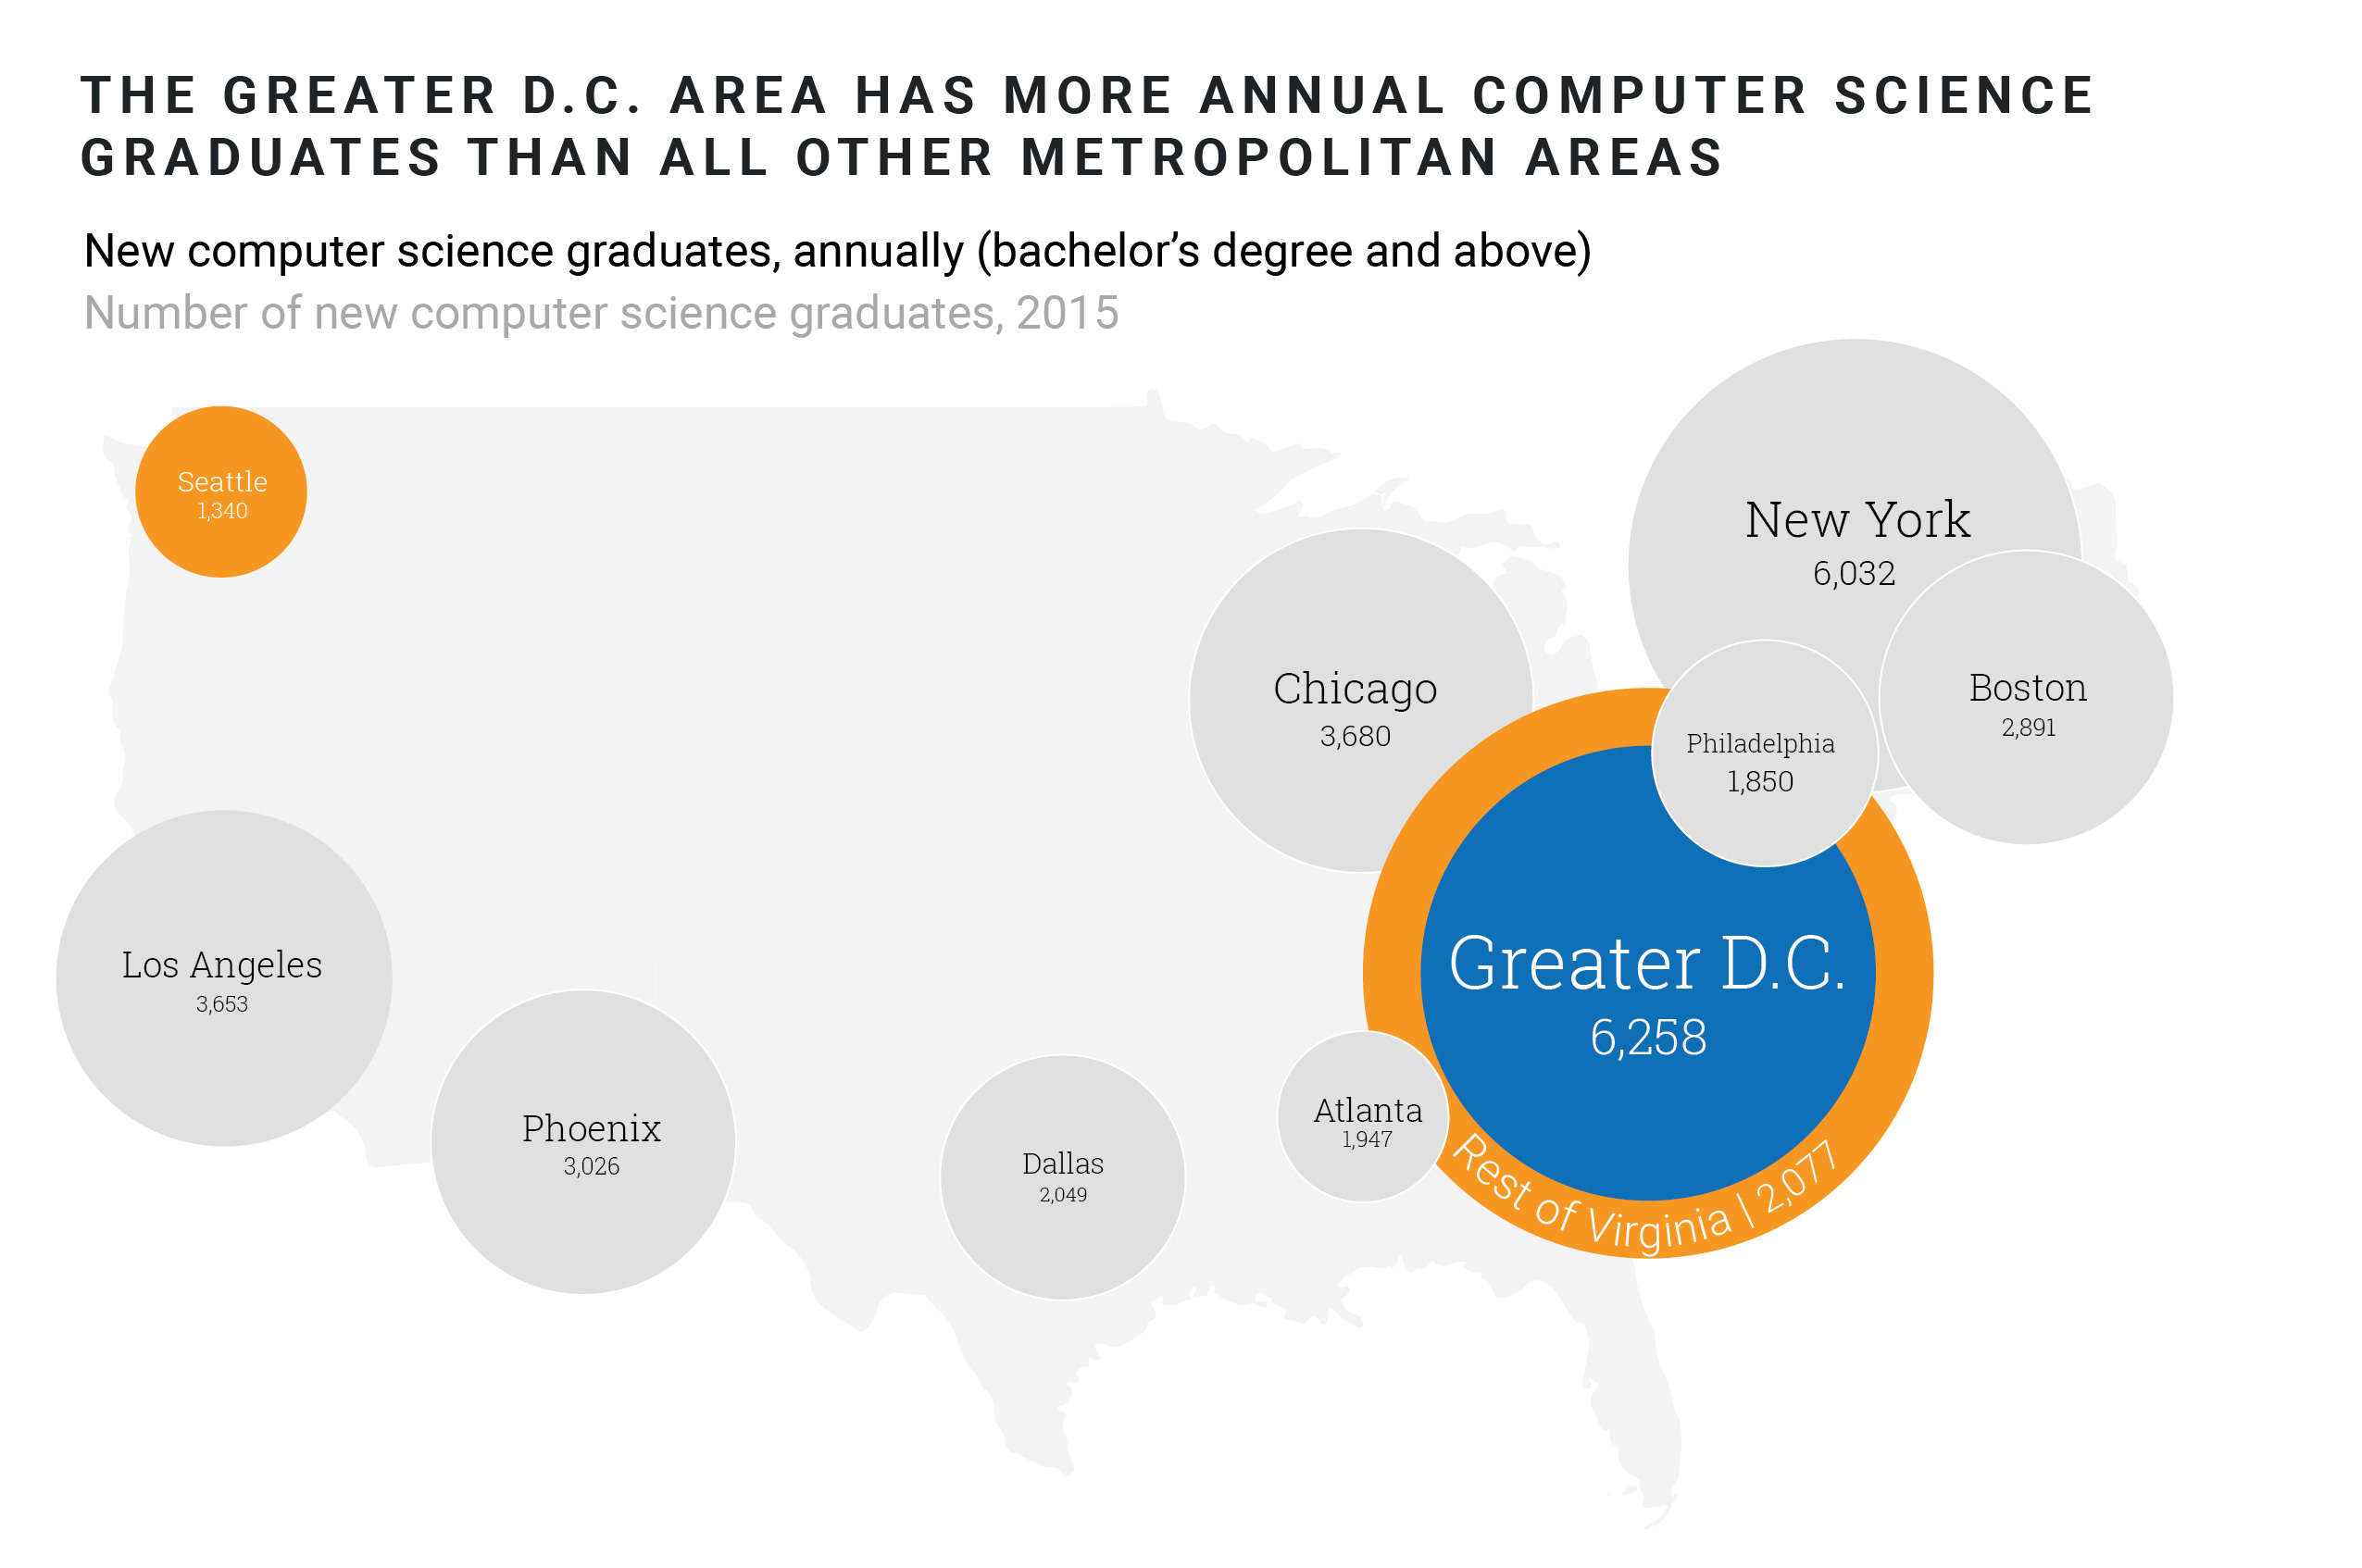 The greater D.C. area has more annual computer science graduates than all other metropolitan areas